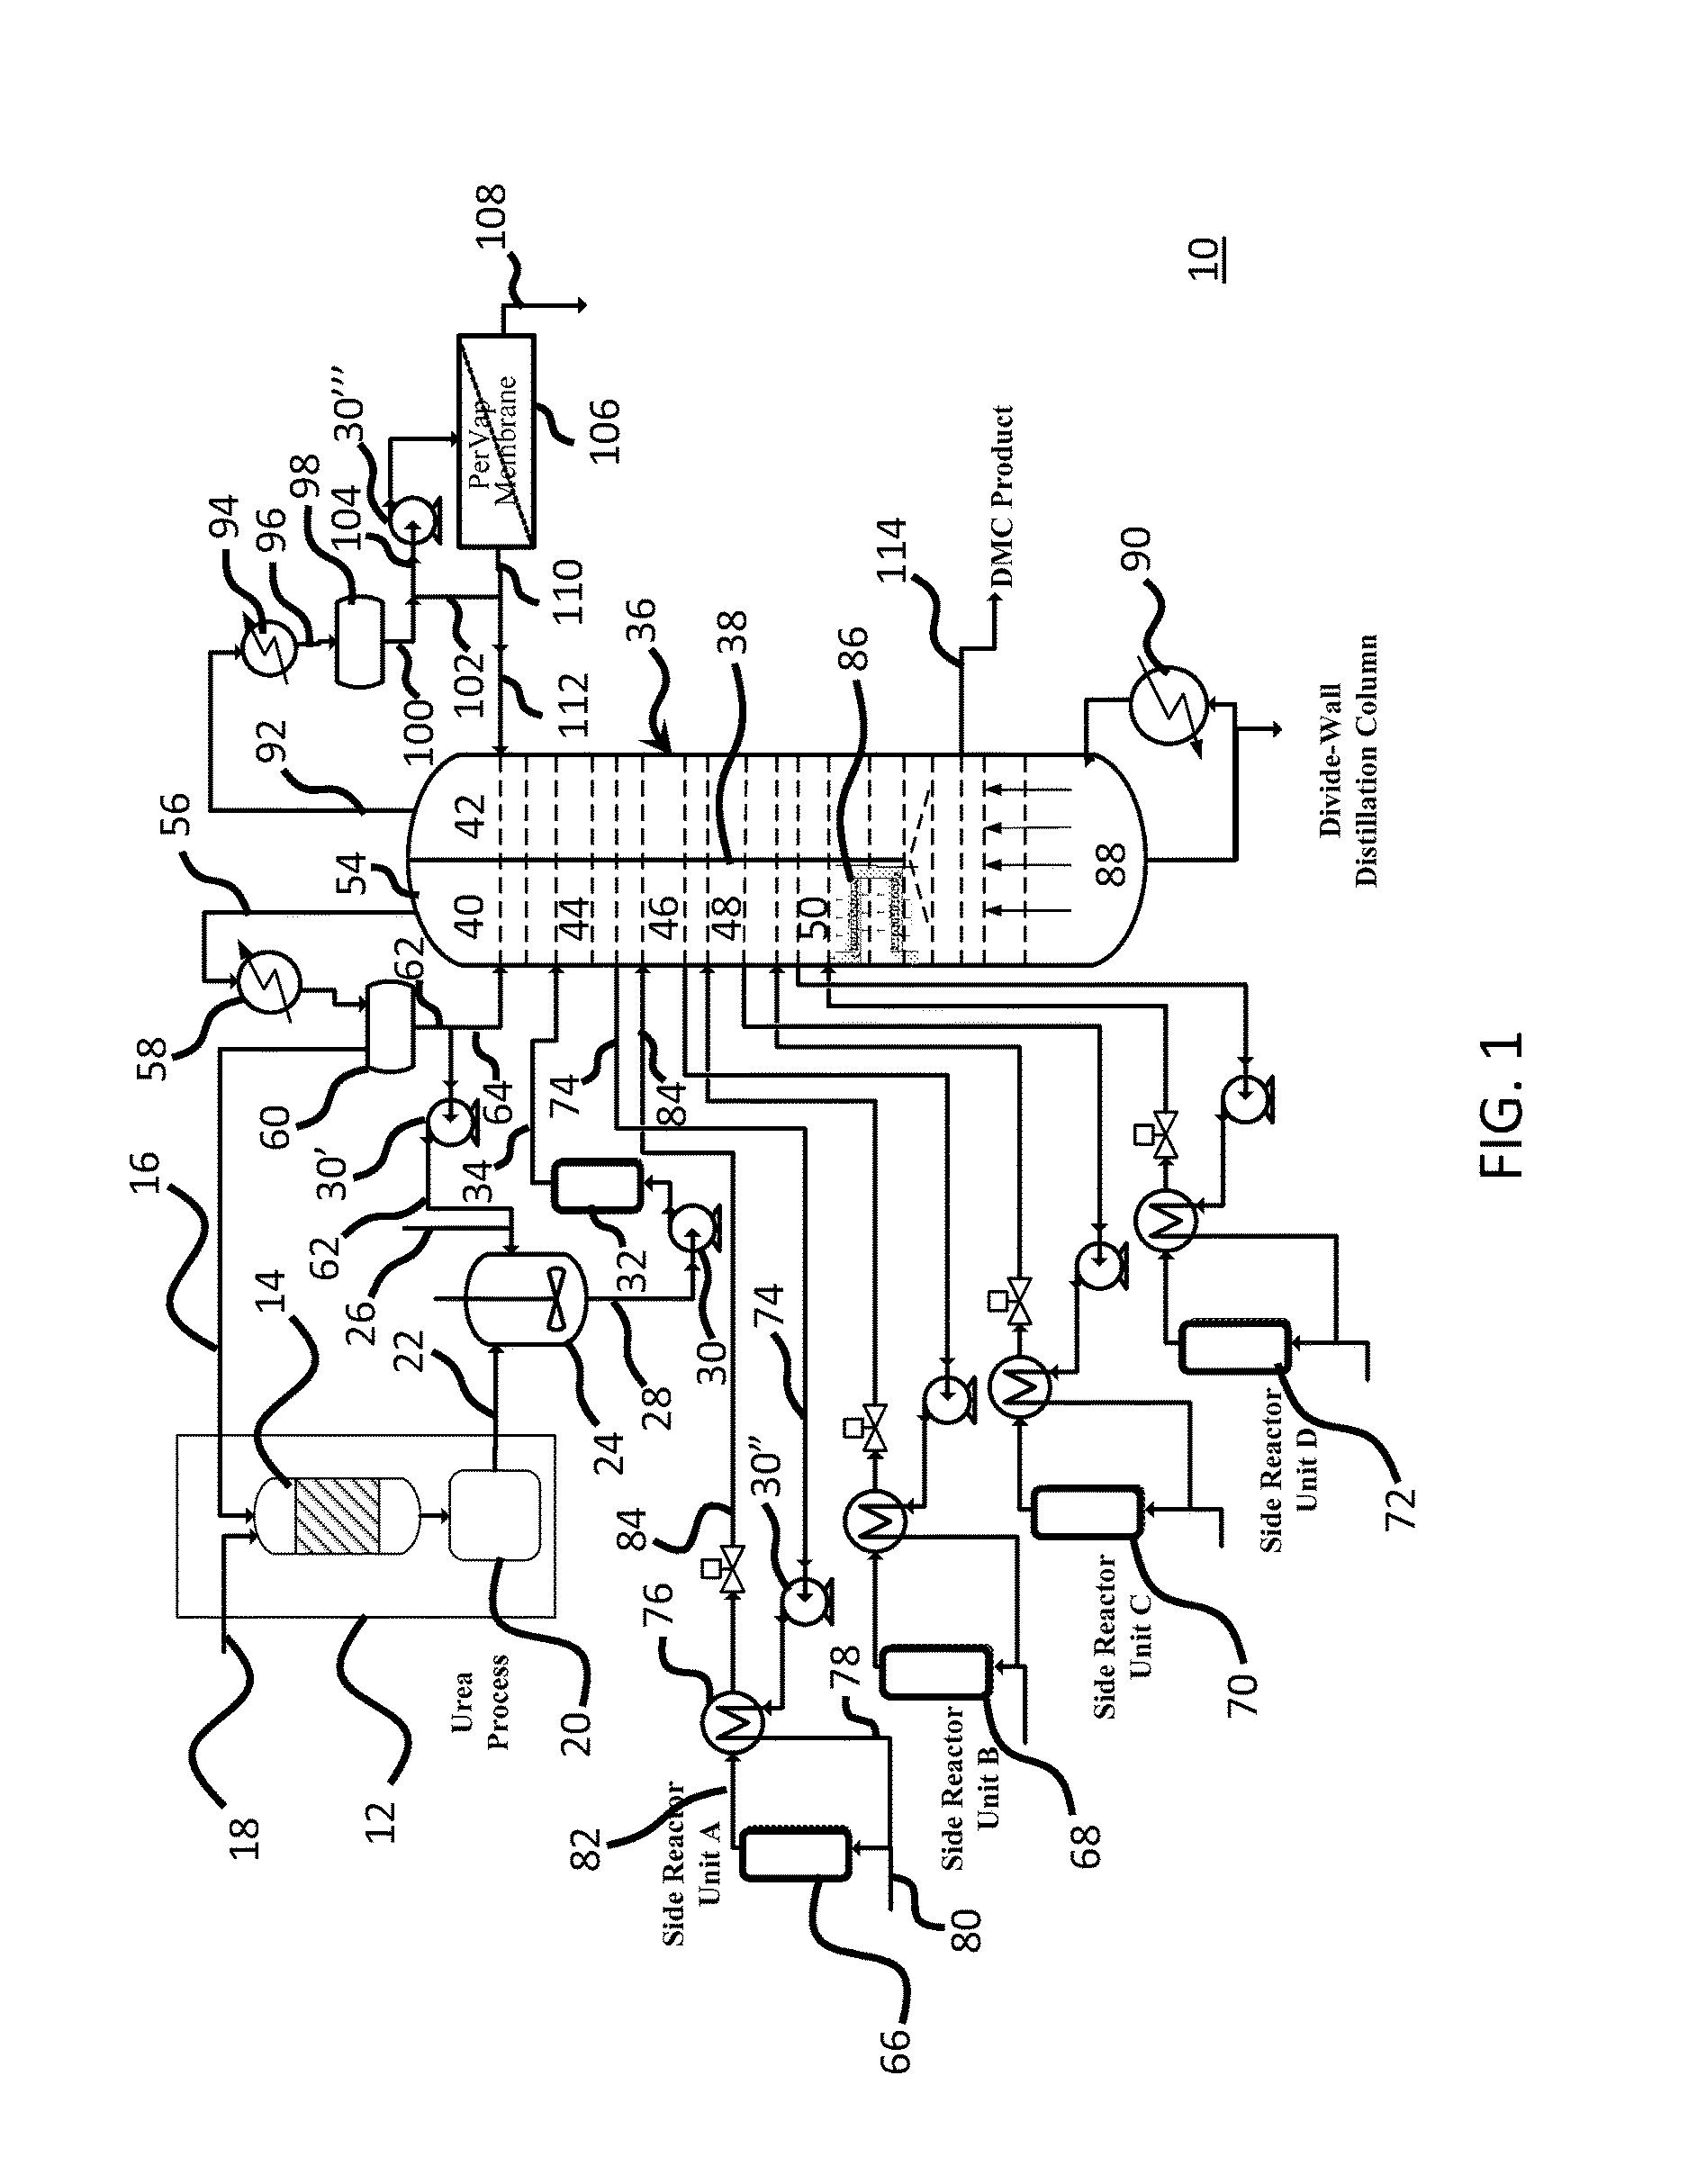 Method of producing high-concentration alkyl carbonates using carbon dioxide as feedstock